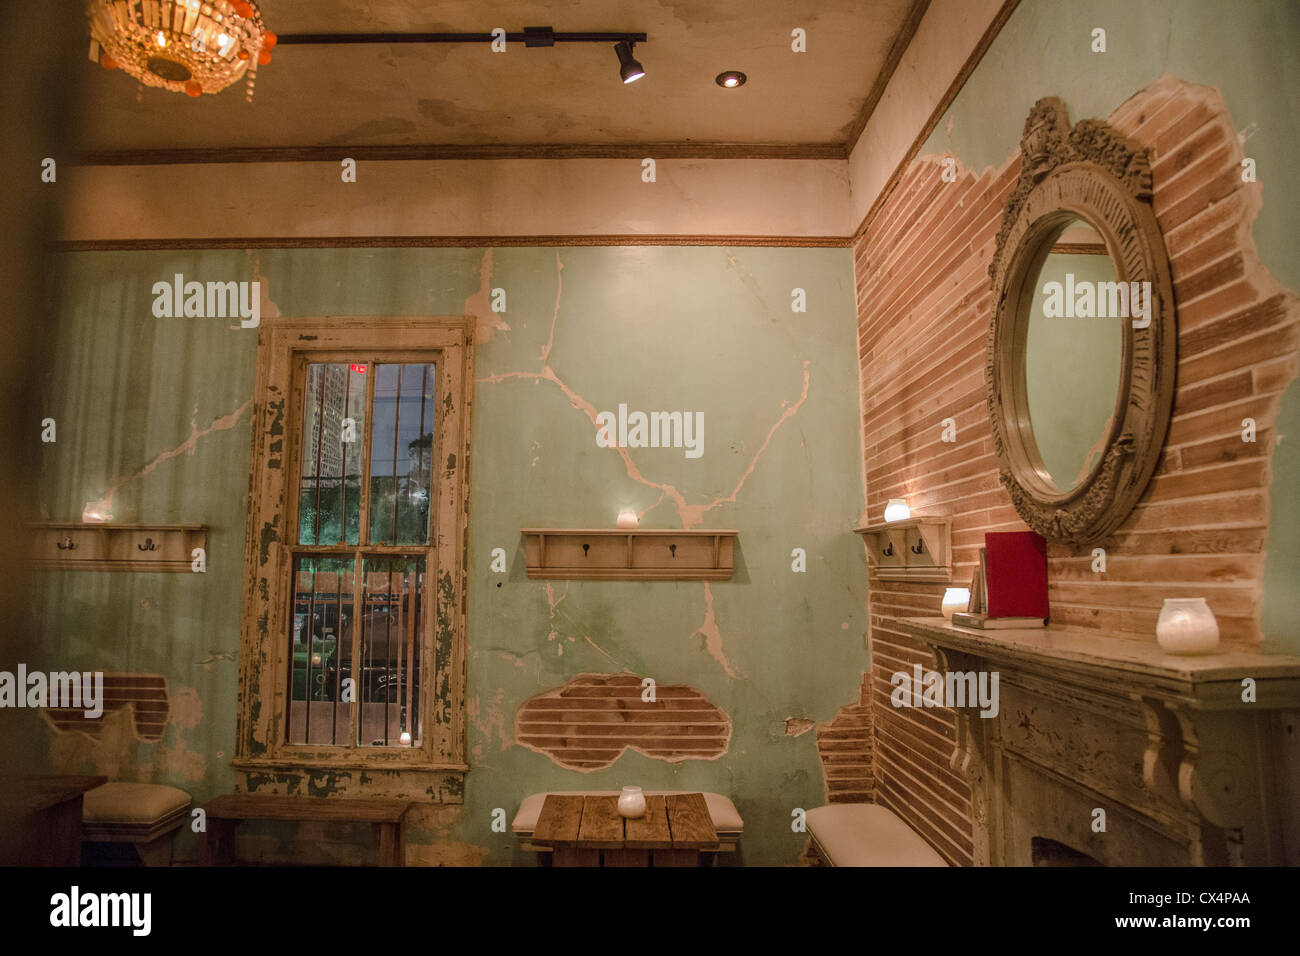 Interior of a the Lustre Pearl bar in Austin, Texas.  The interior was made to look distressed and antique. Stock Photo